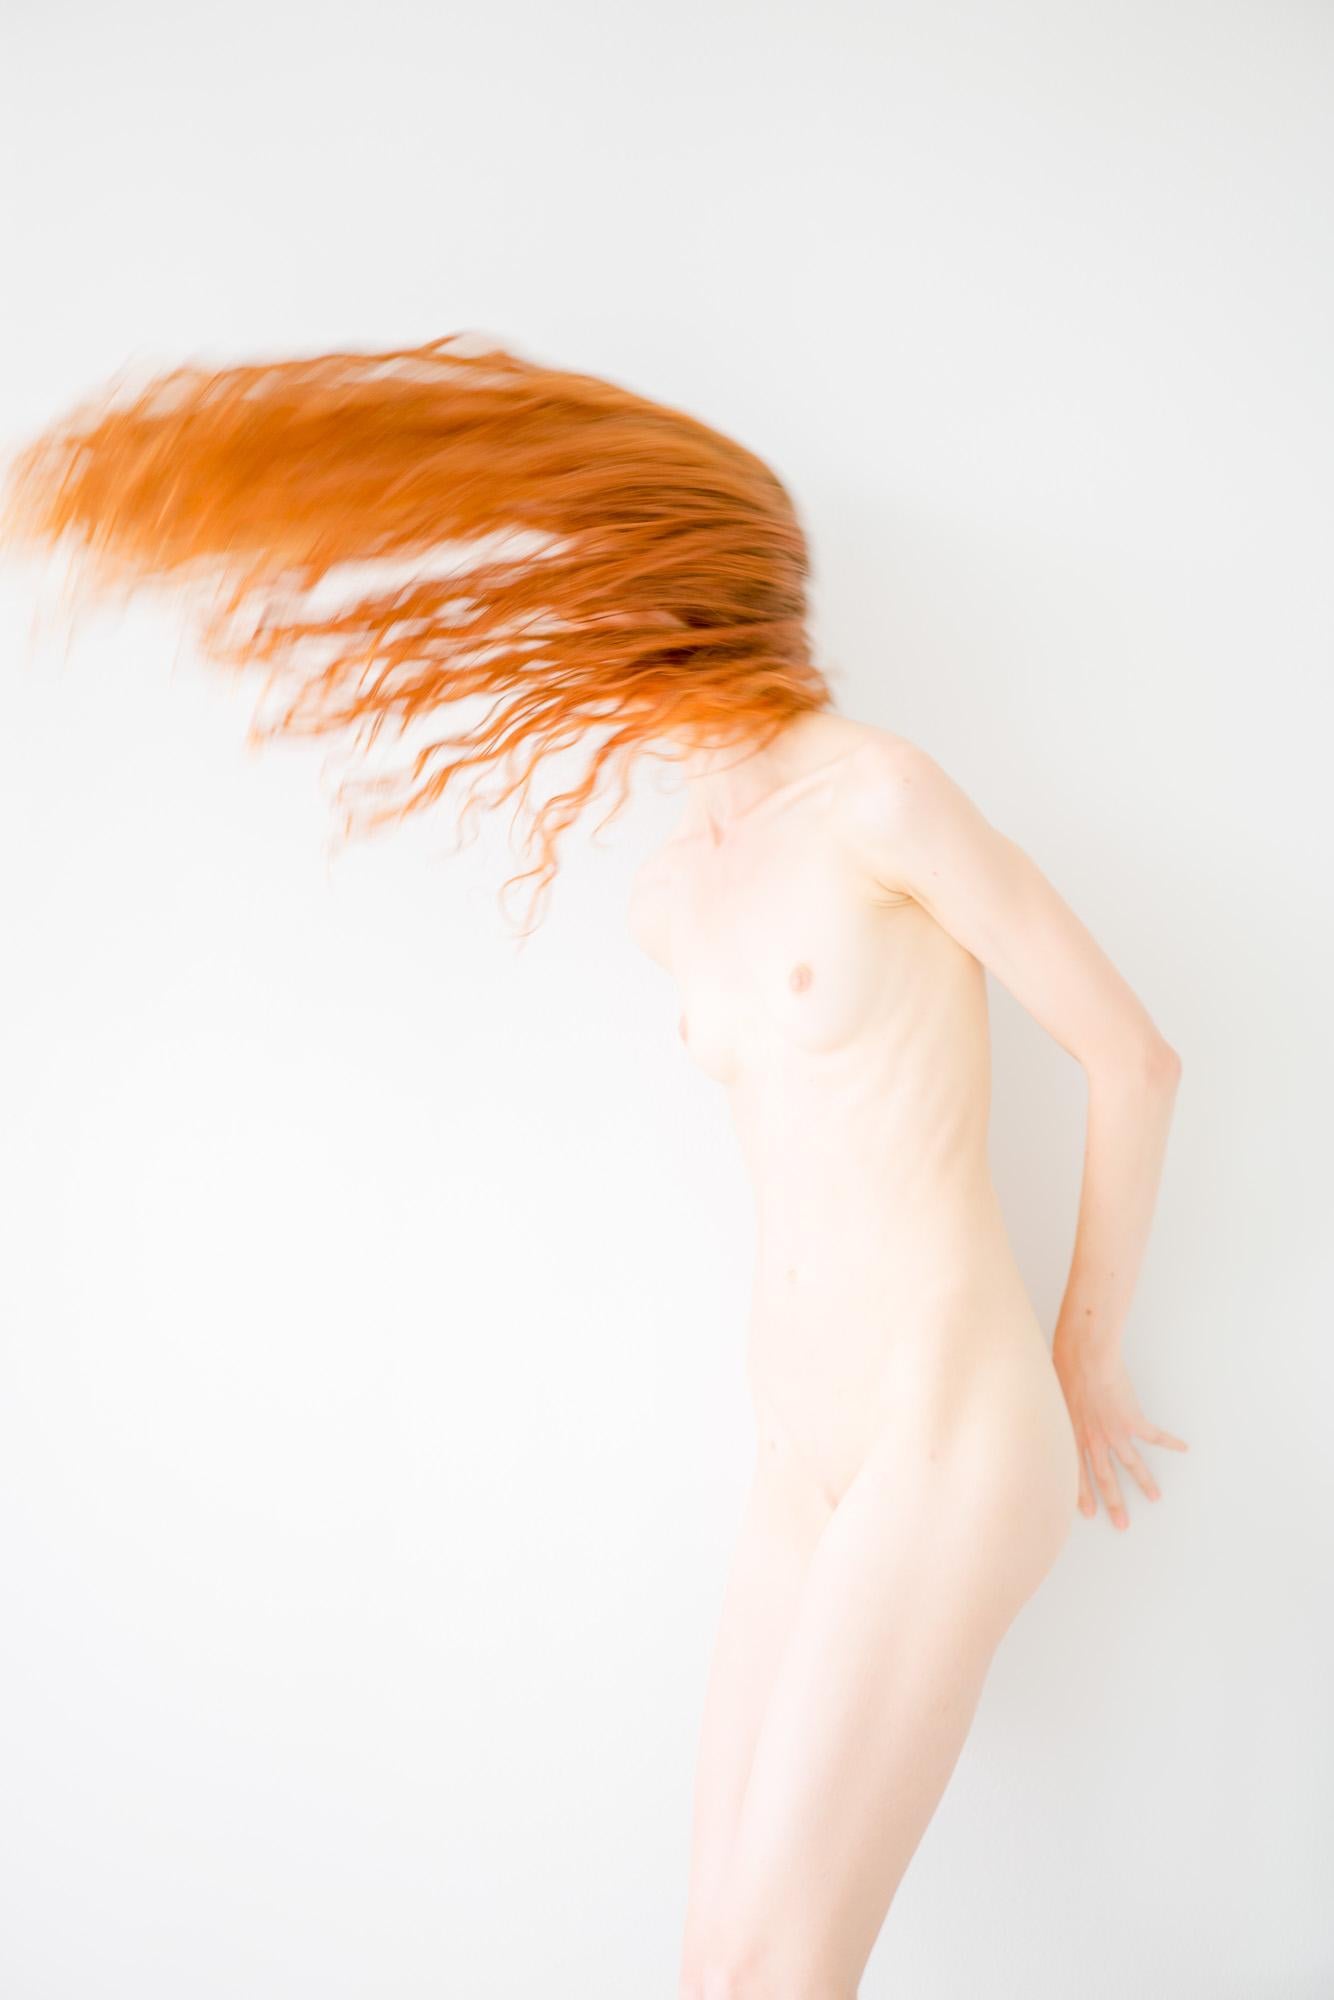 Nude Photograph David Jay - Nude Color Photographie #2.